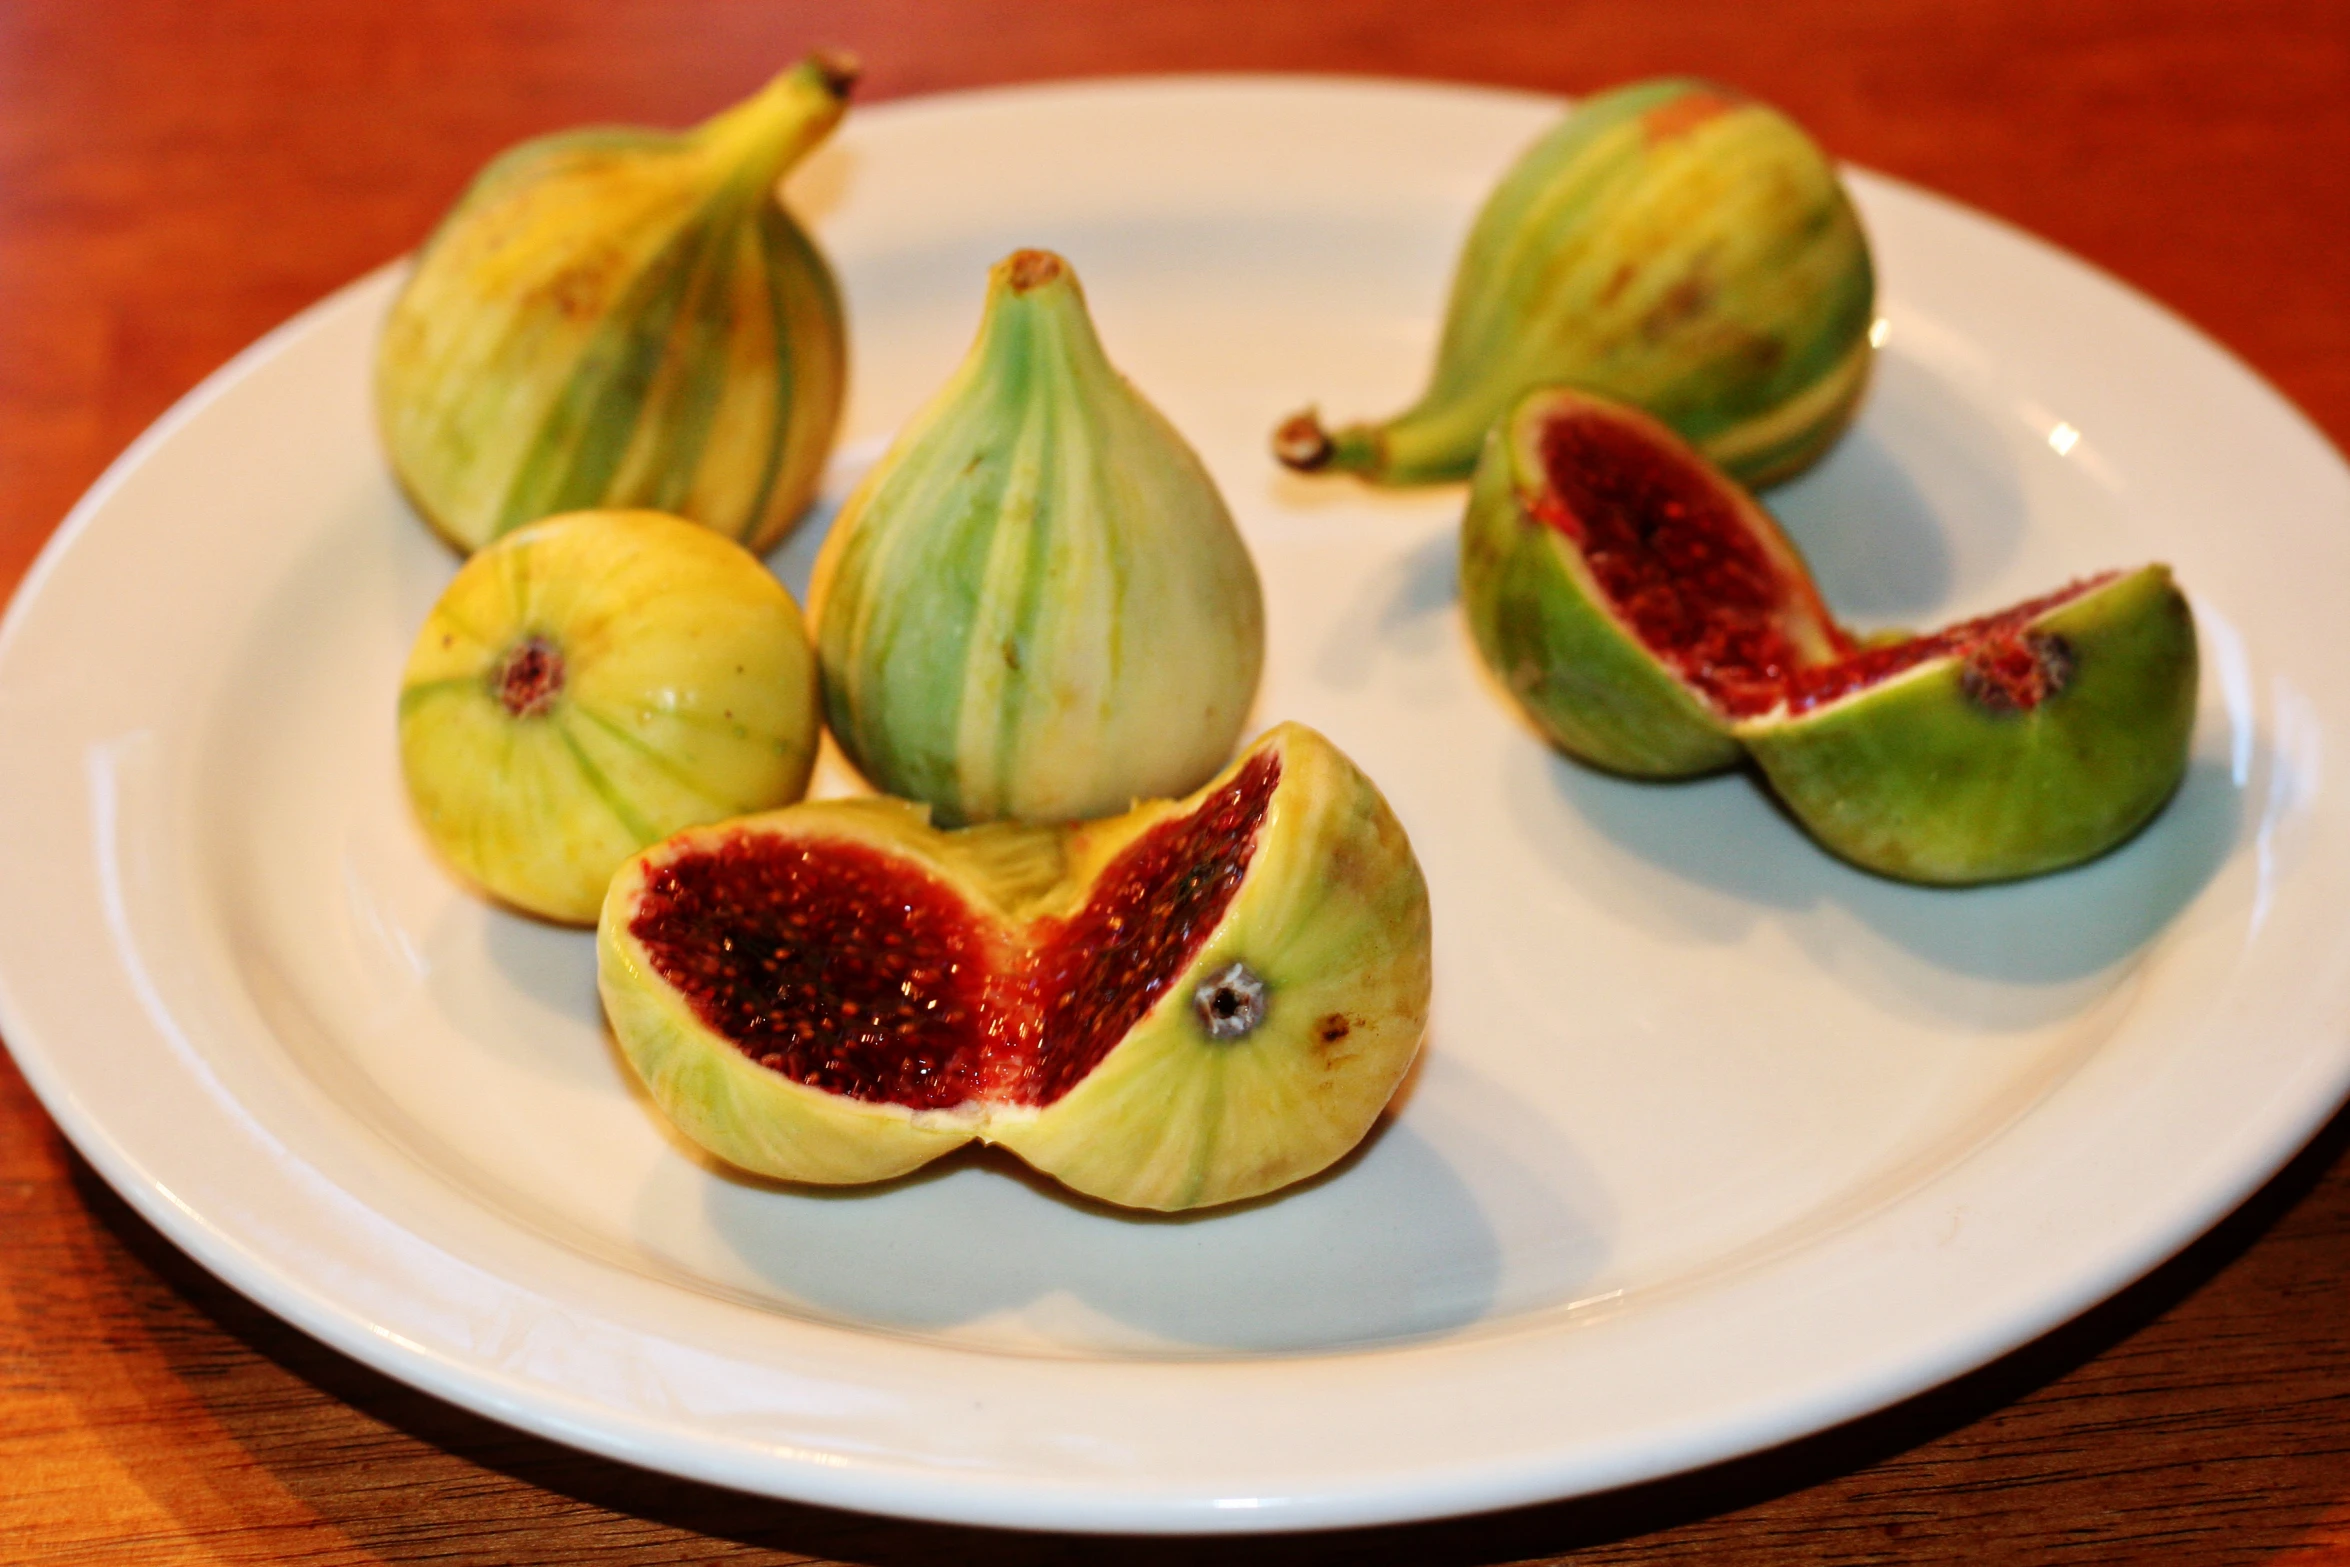 this is a plate with pieces of figs and some cut in half